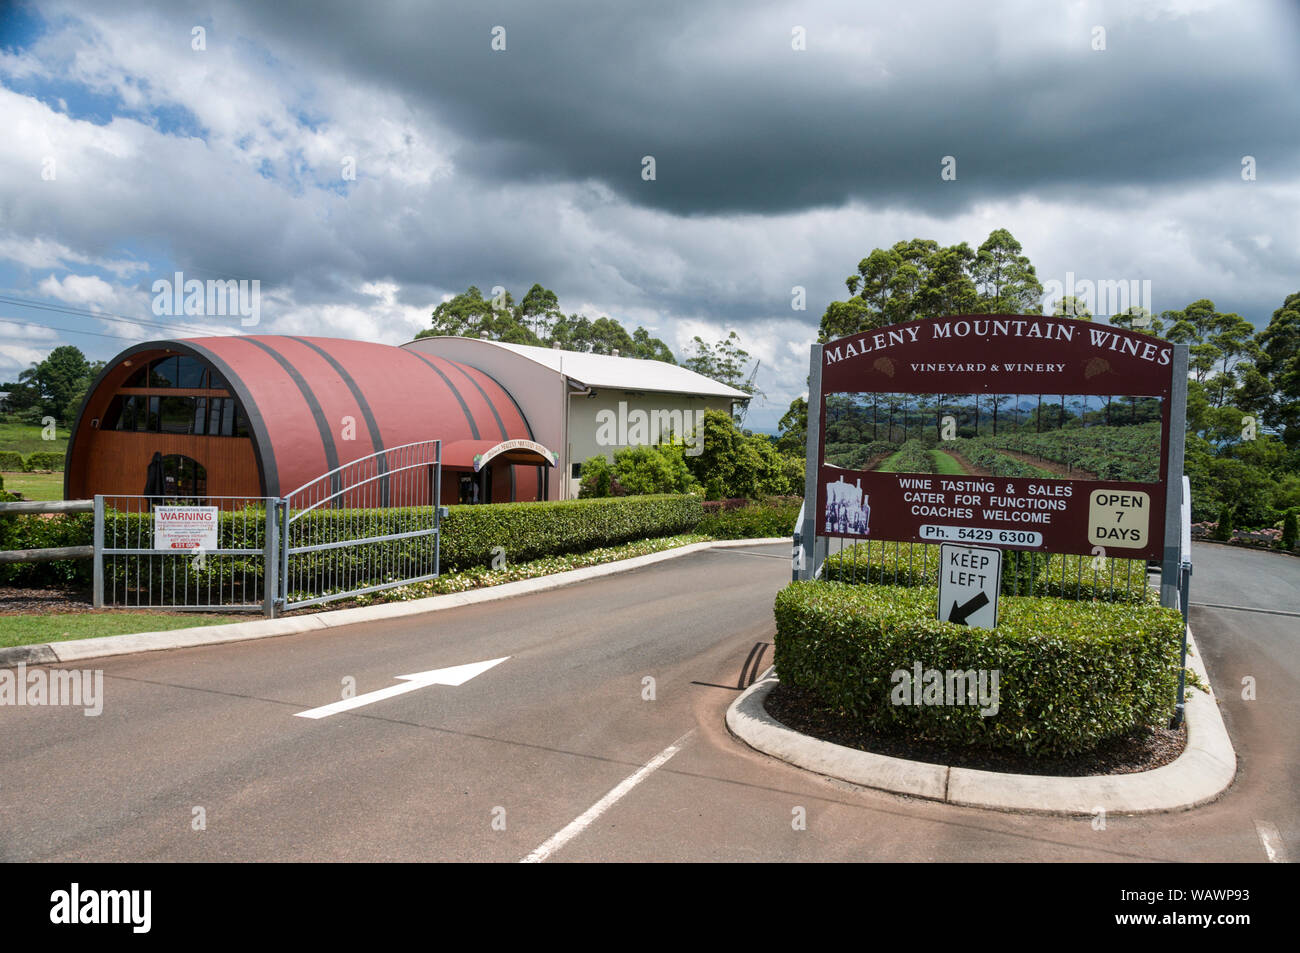 A wine-growing Vinyard, ‘Maleny Mountain Wines’ in the hills on the Sunshine Coast hinterland near Maleny in Queensland, Australia Stock Photo